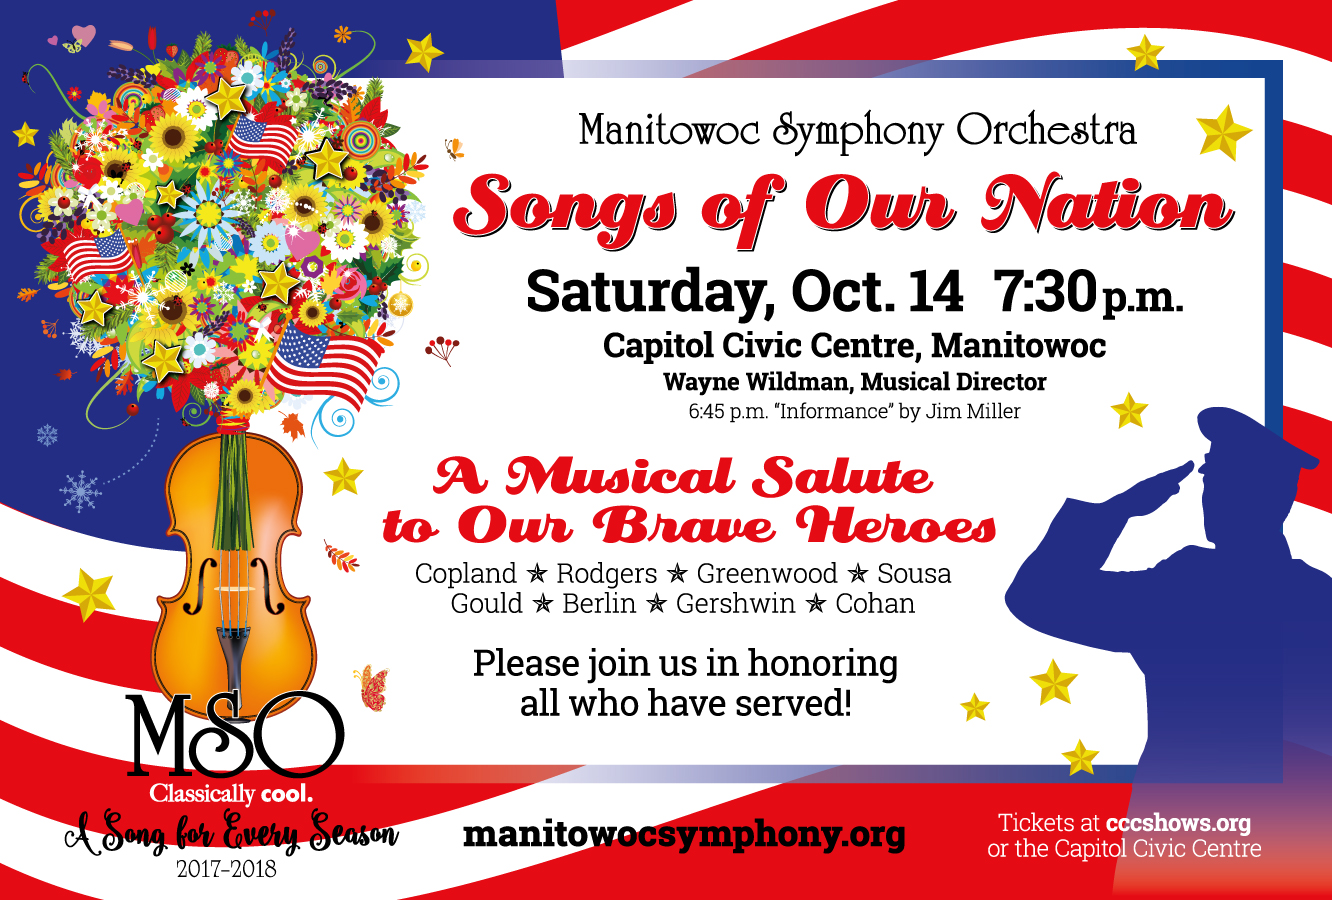 poster for songs of our nation - red white and blue with a soldier saluting. The season graphic of a violin with a colorful and fun bouquet full of flowers, flags and stars is at the left.